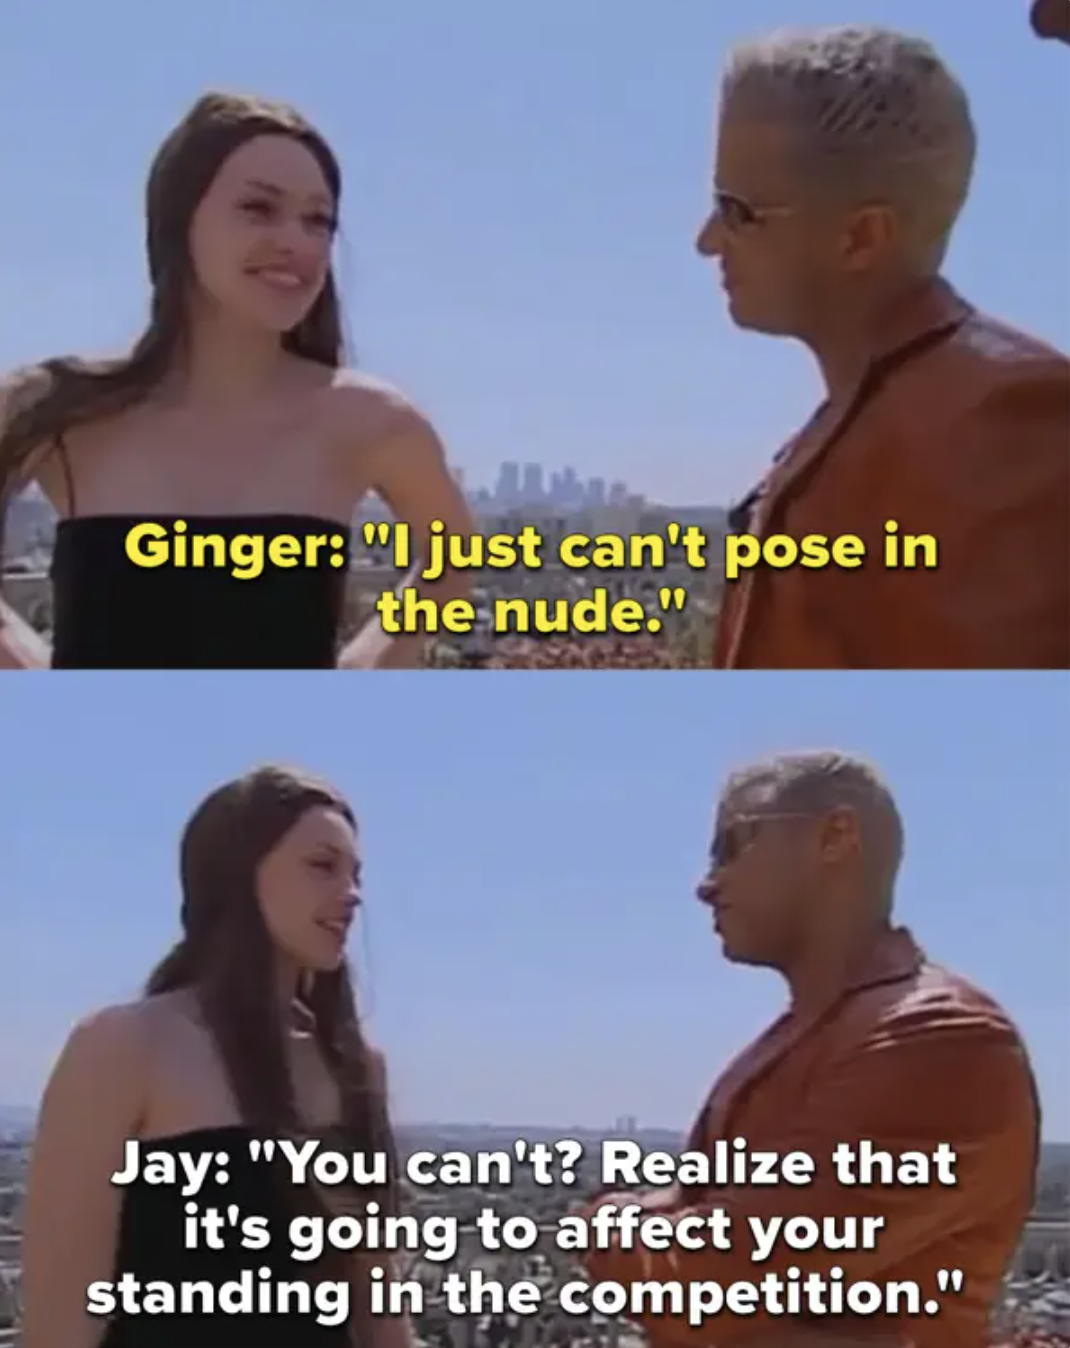 Ginger talking to Mr. Jay about how she can&#x27;t pose in the nude and Jay says it&#x27;s going to affect her standing in the competition